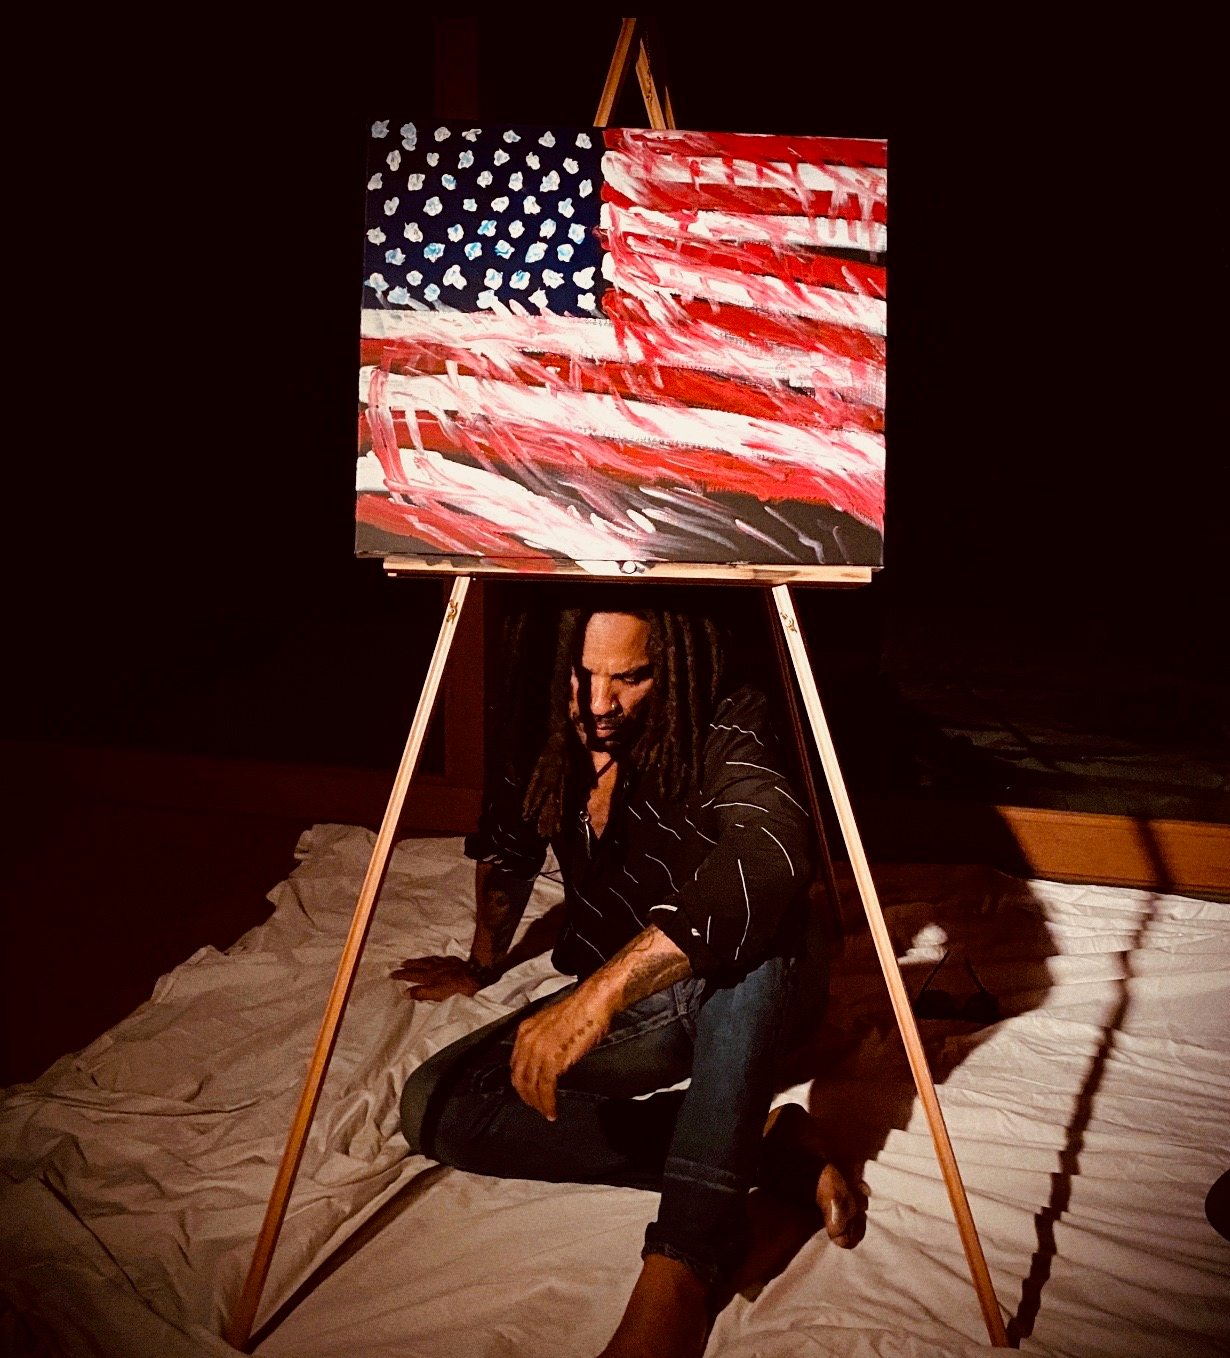 Lenny Kravitz with his untitled painting for the “Show Me the Signs” auction. Photo courtesy of the African American Policy Forum.